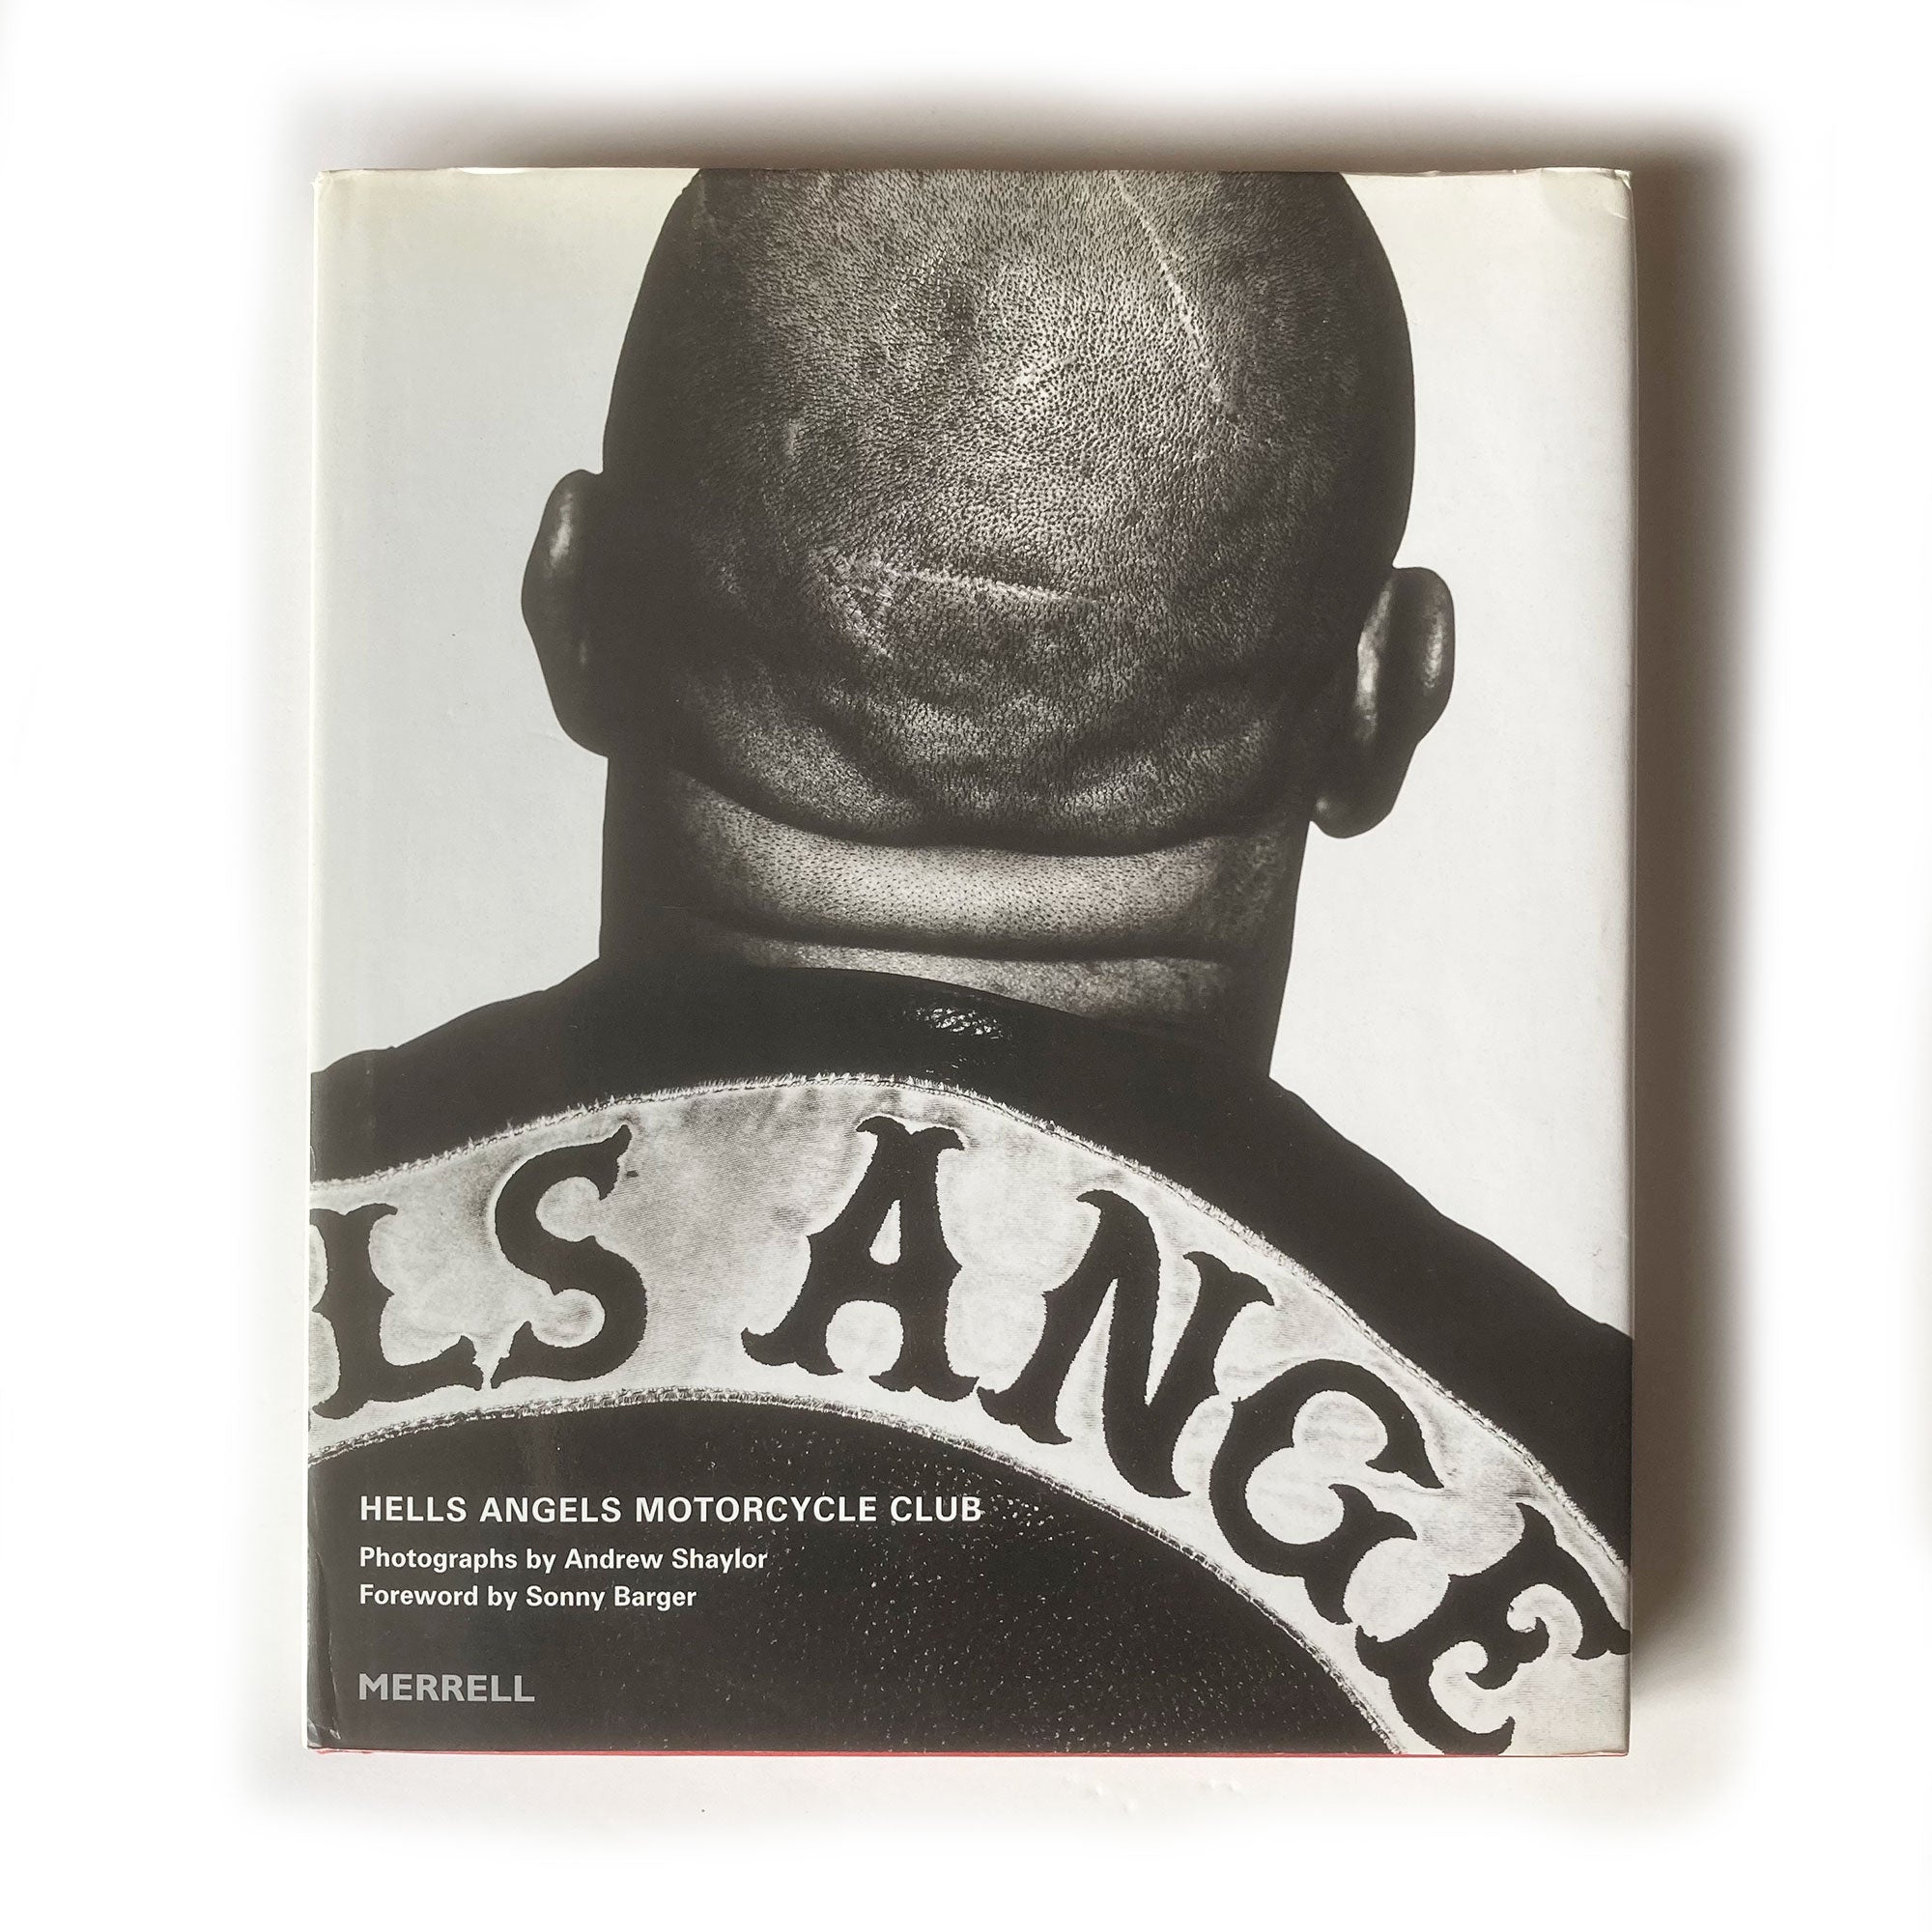 Hells Angels Motorcycle Club by Andrew Shaylor, signed by Sonny Barger